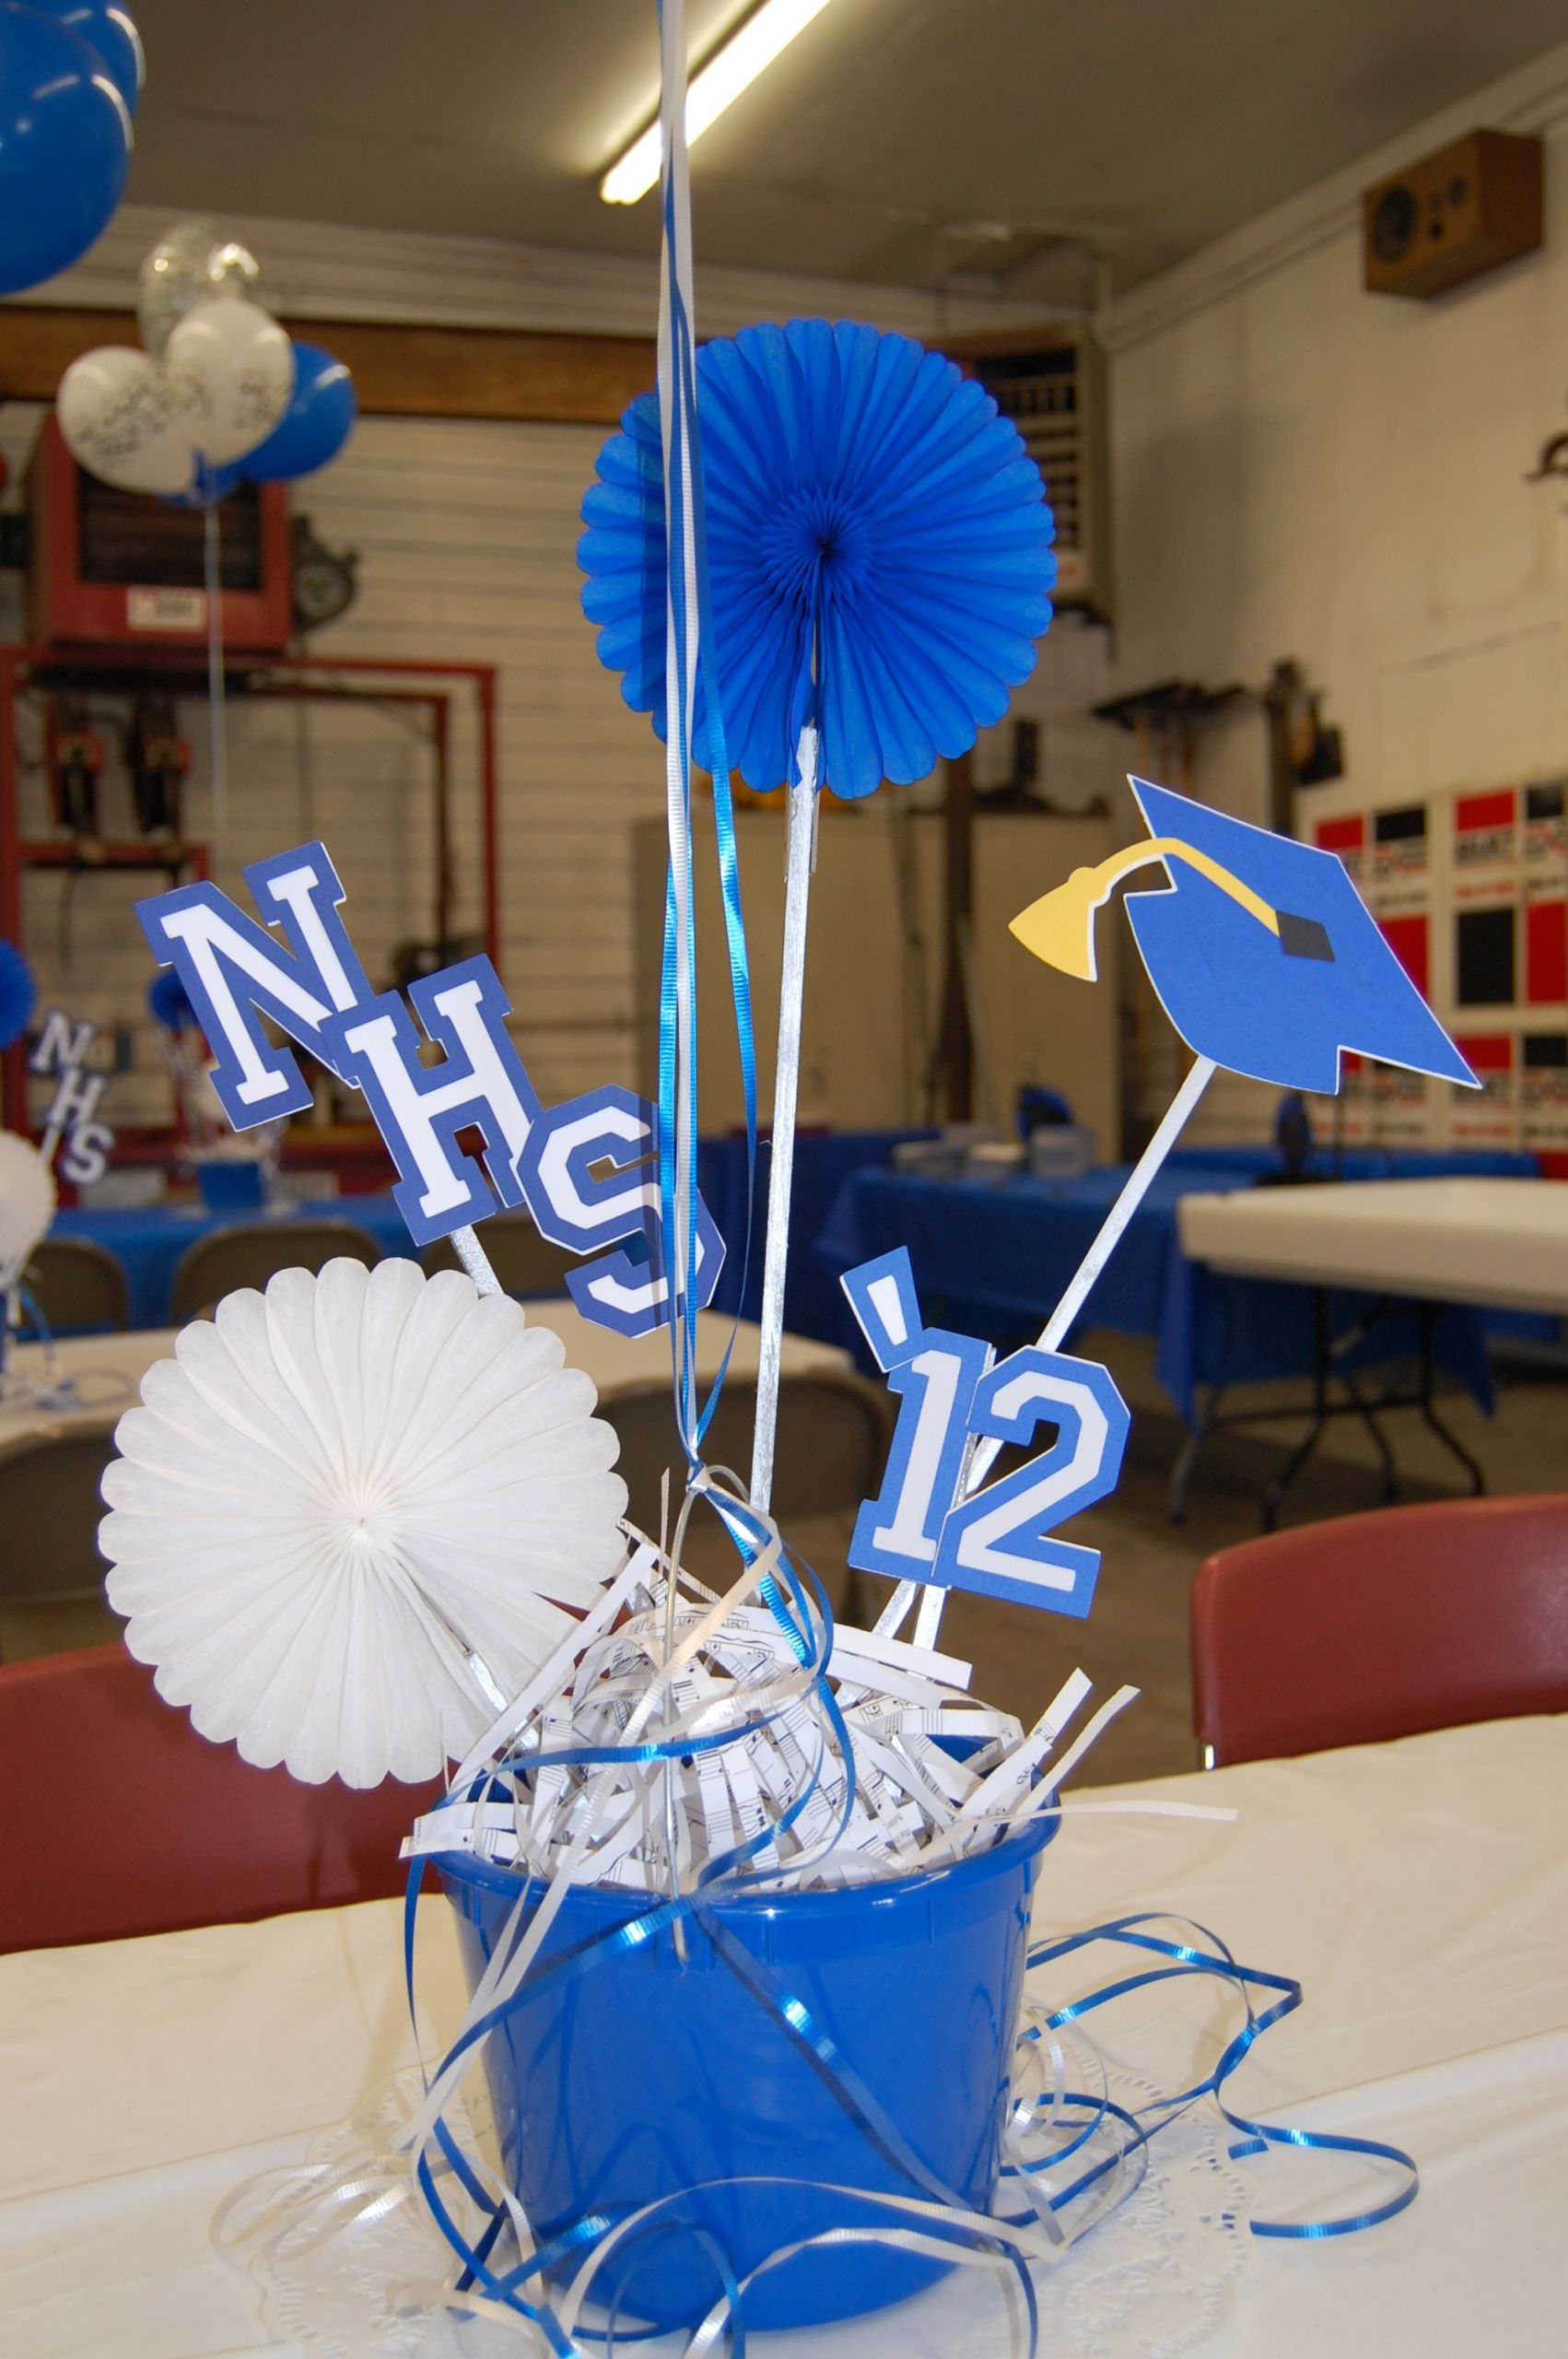 Centerpiece Ideas For Graduation Party
 Easy centerpieces Grad time will be here soon